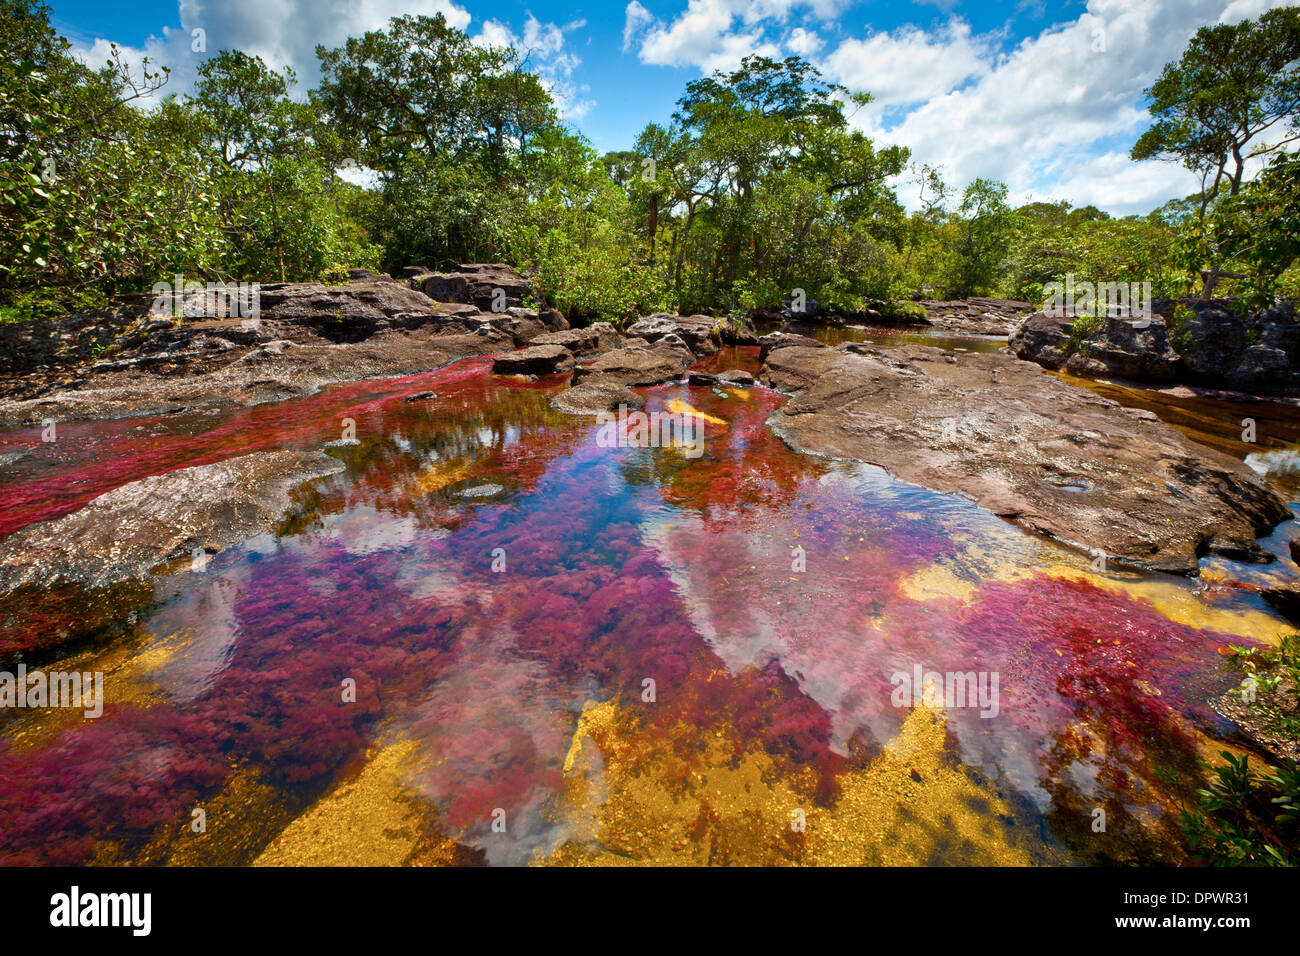 colors-at-cano-cristales-colombia-underw